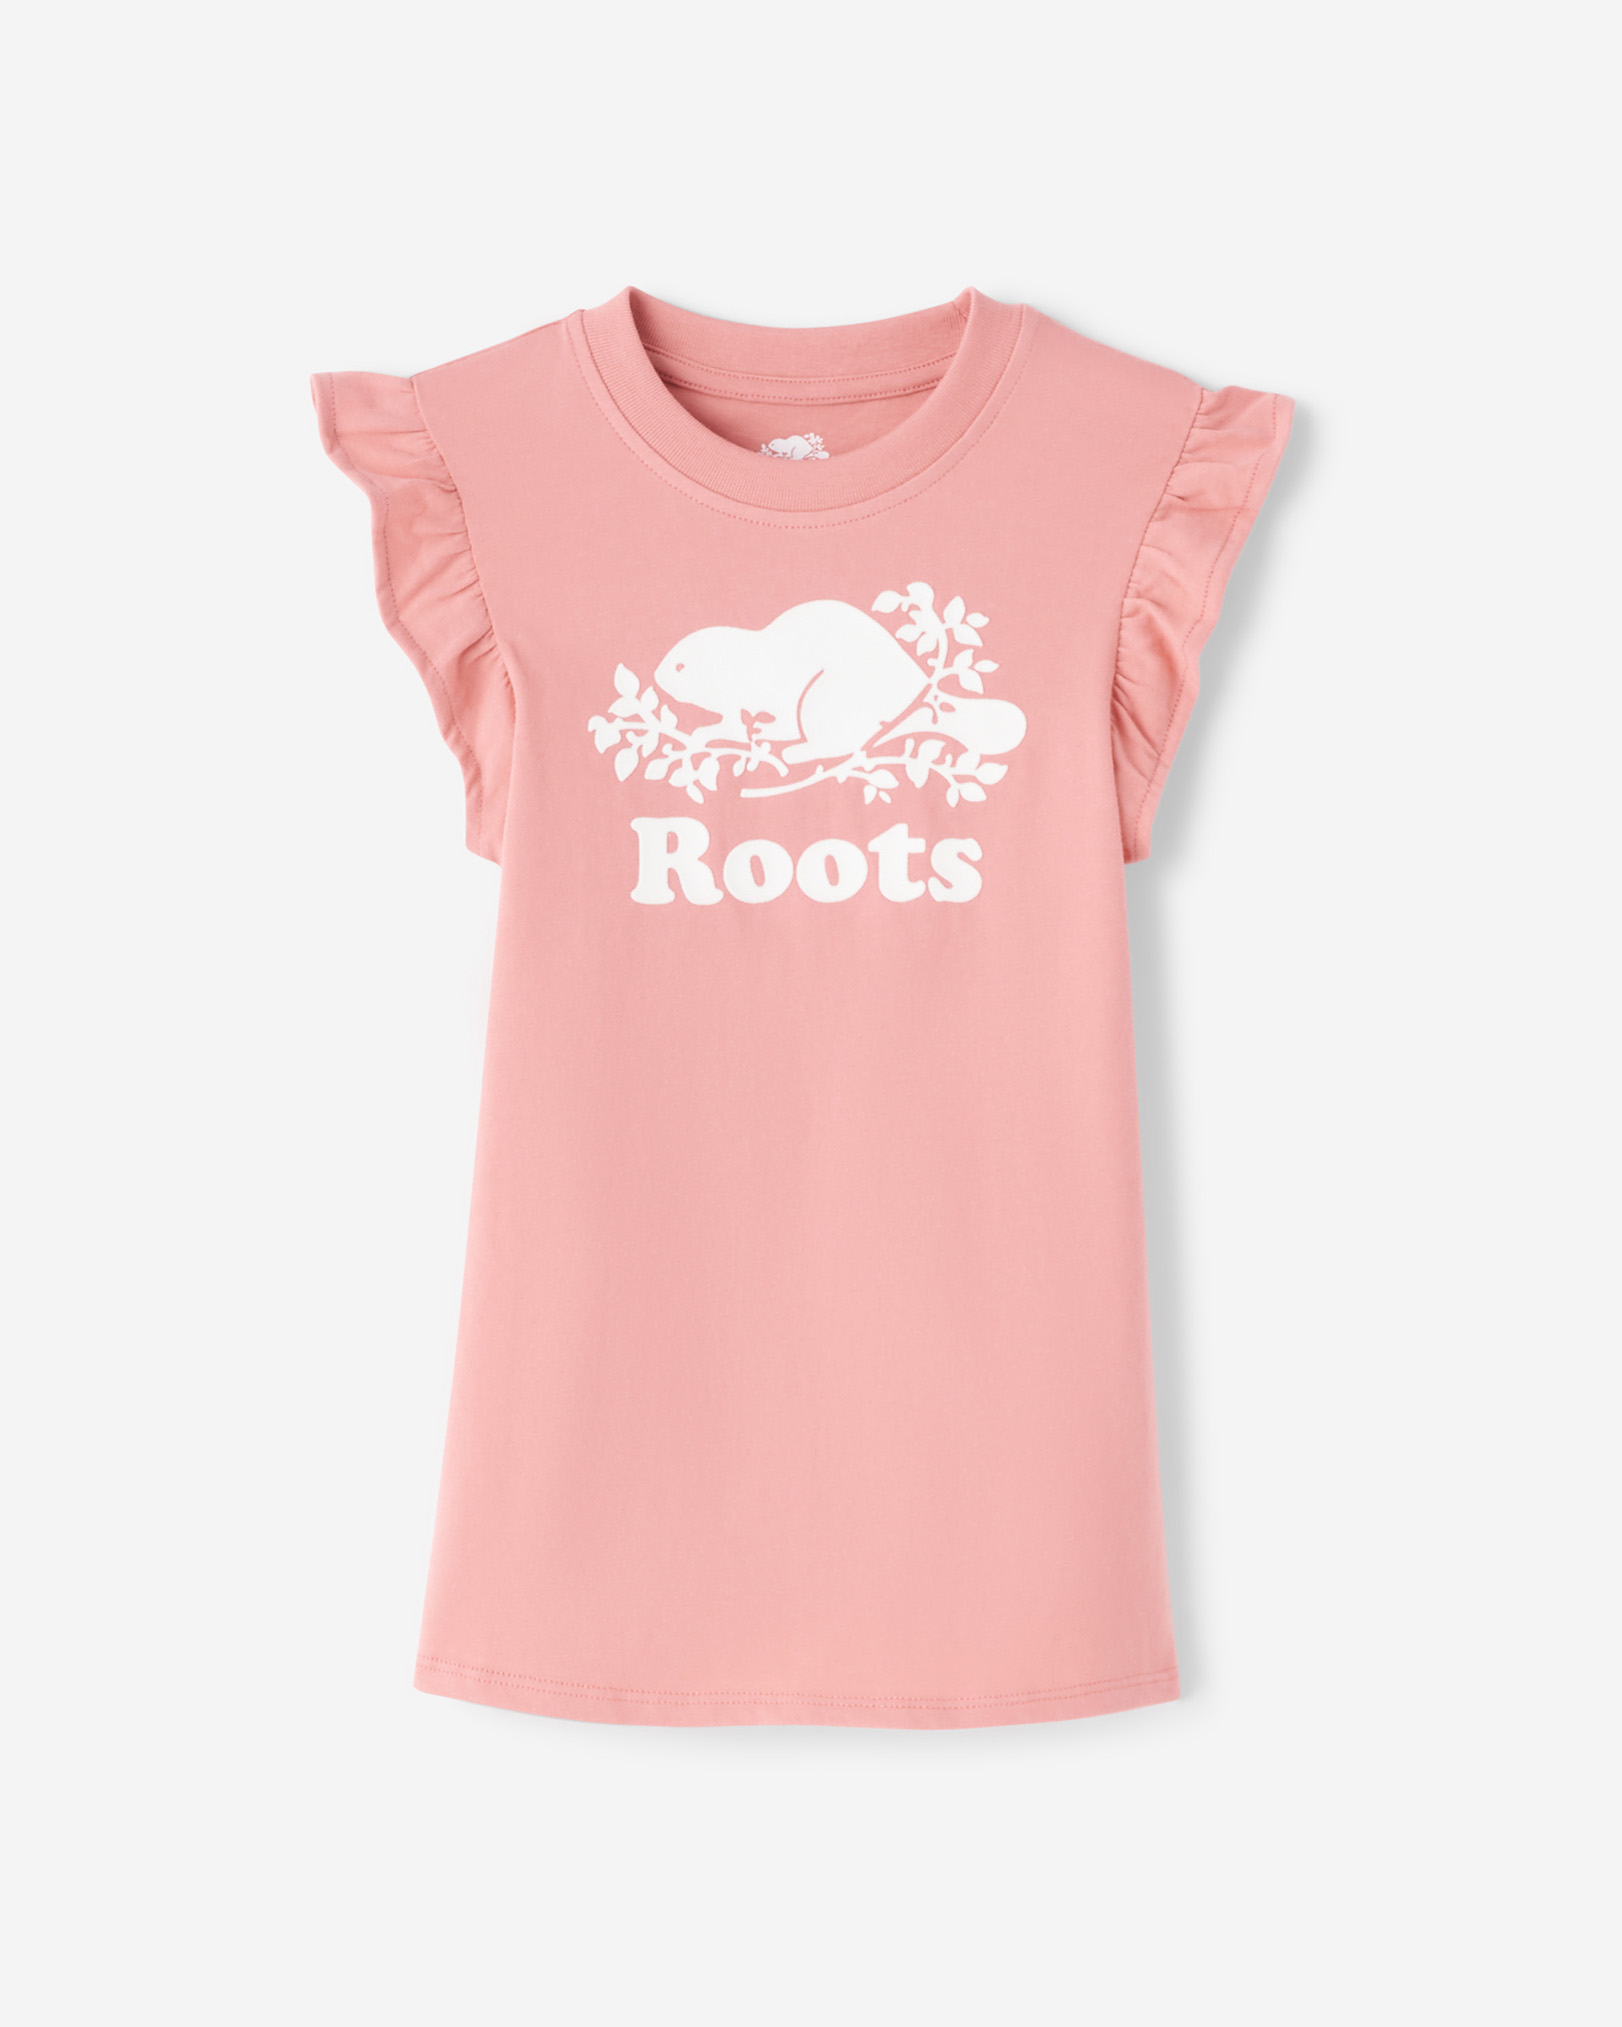 Roots Toddler Girl's Cooper Dress in Mauveglow